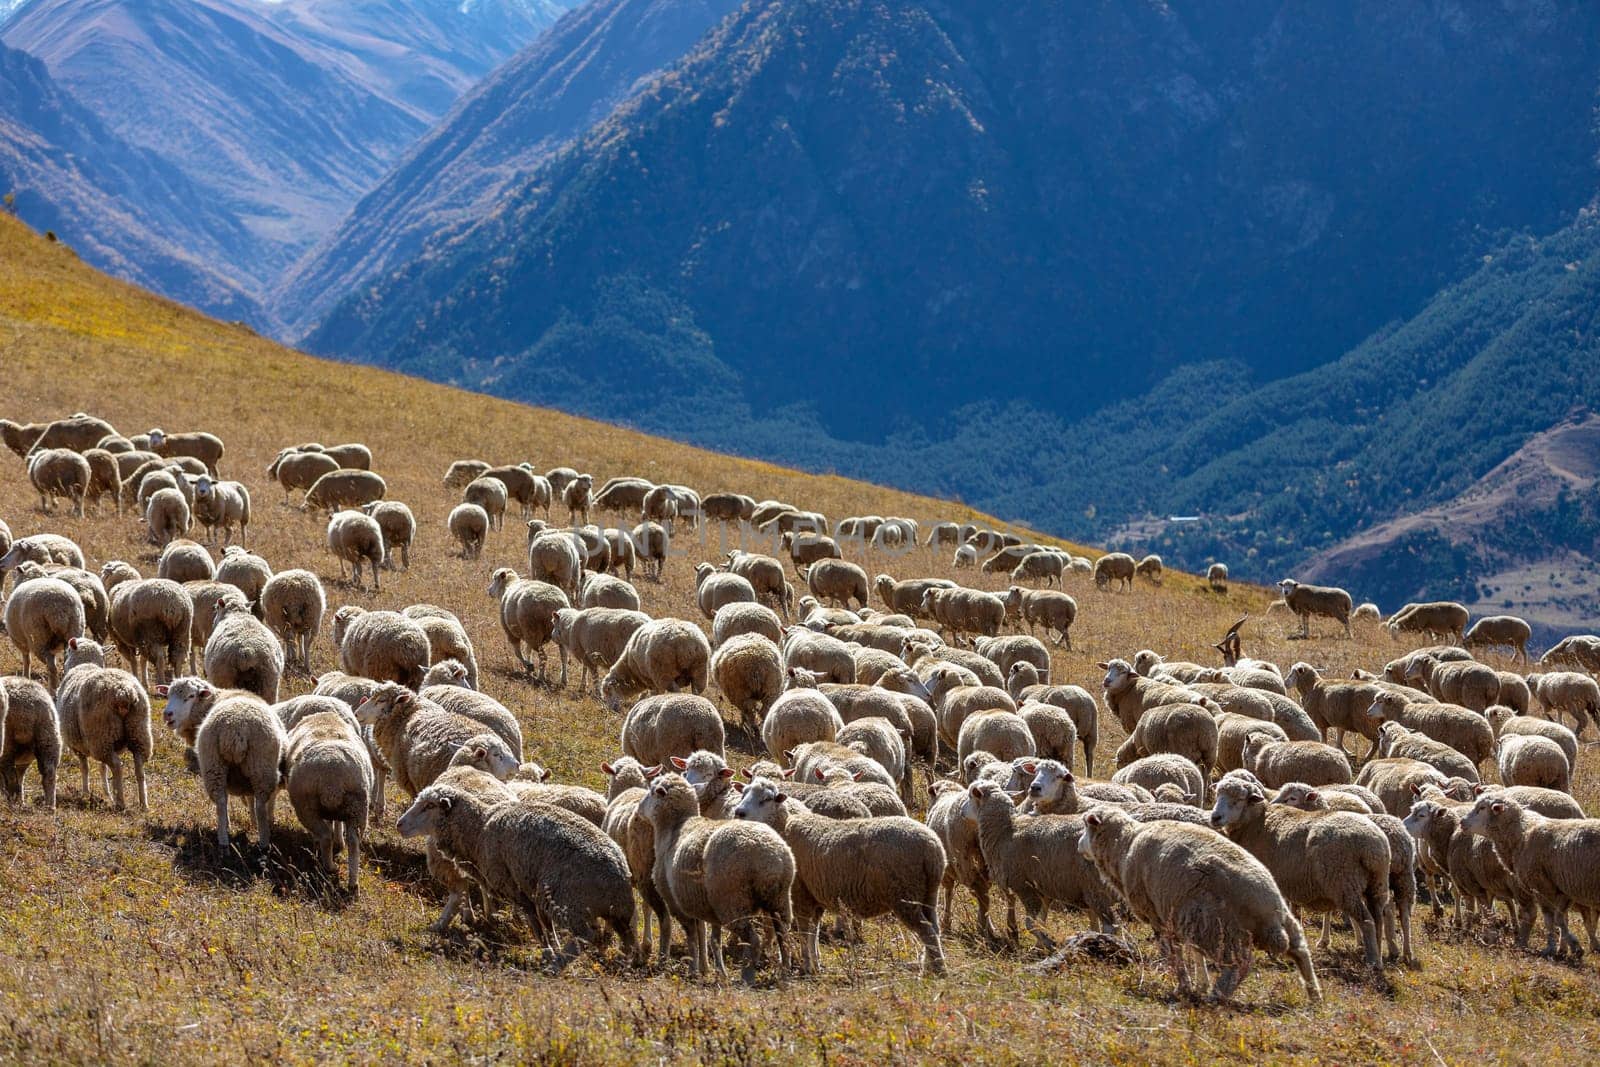 A flock of sheep in the mountains by Yurich32